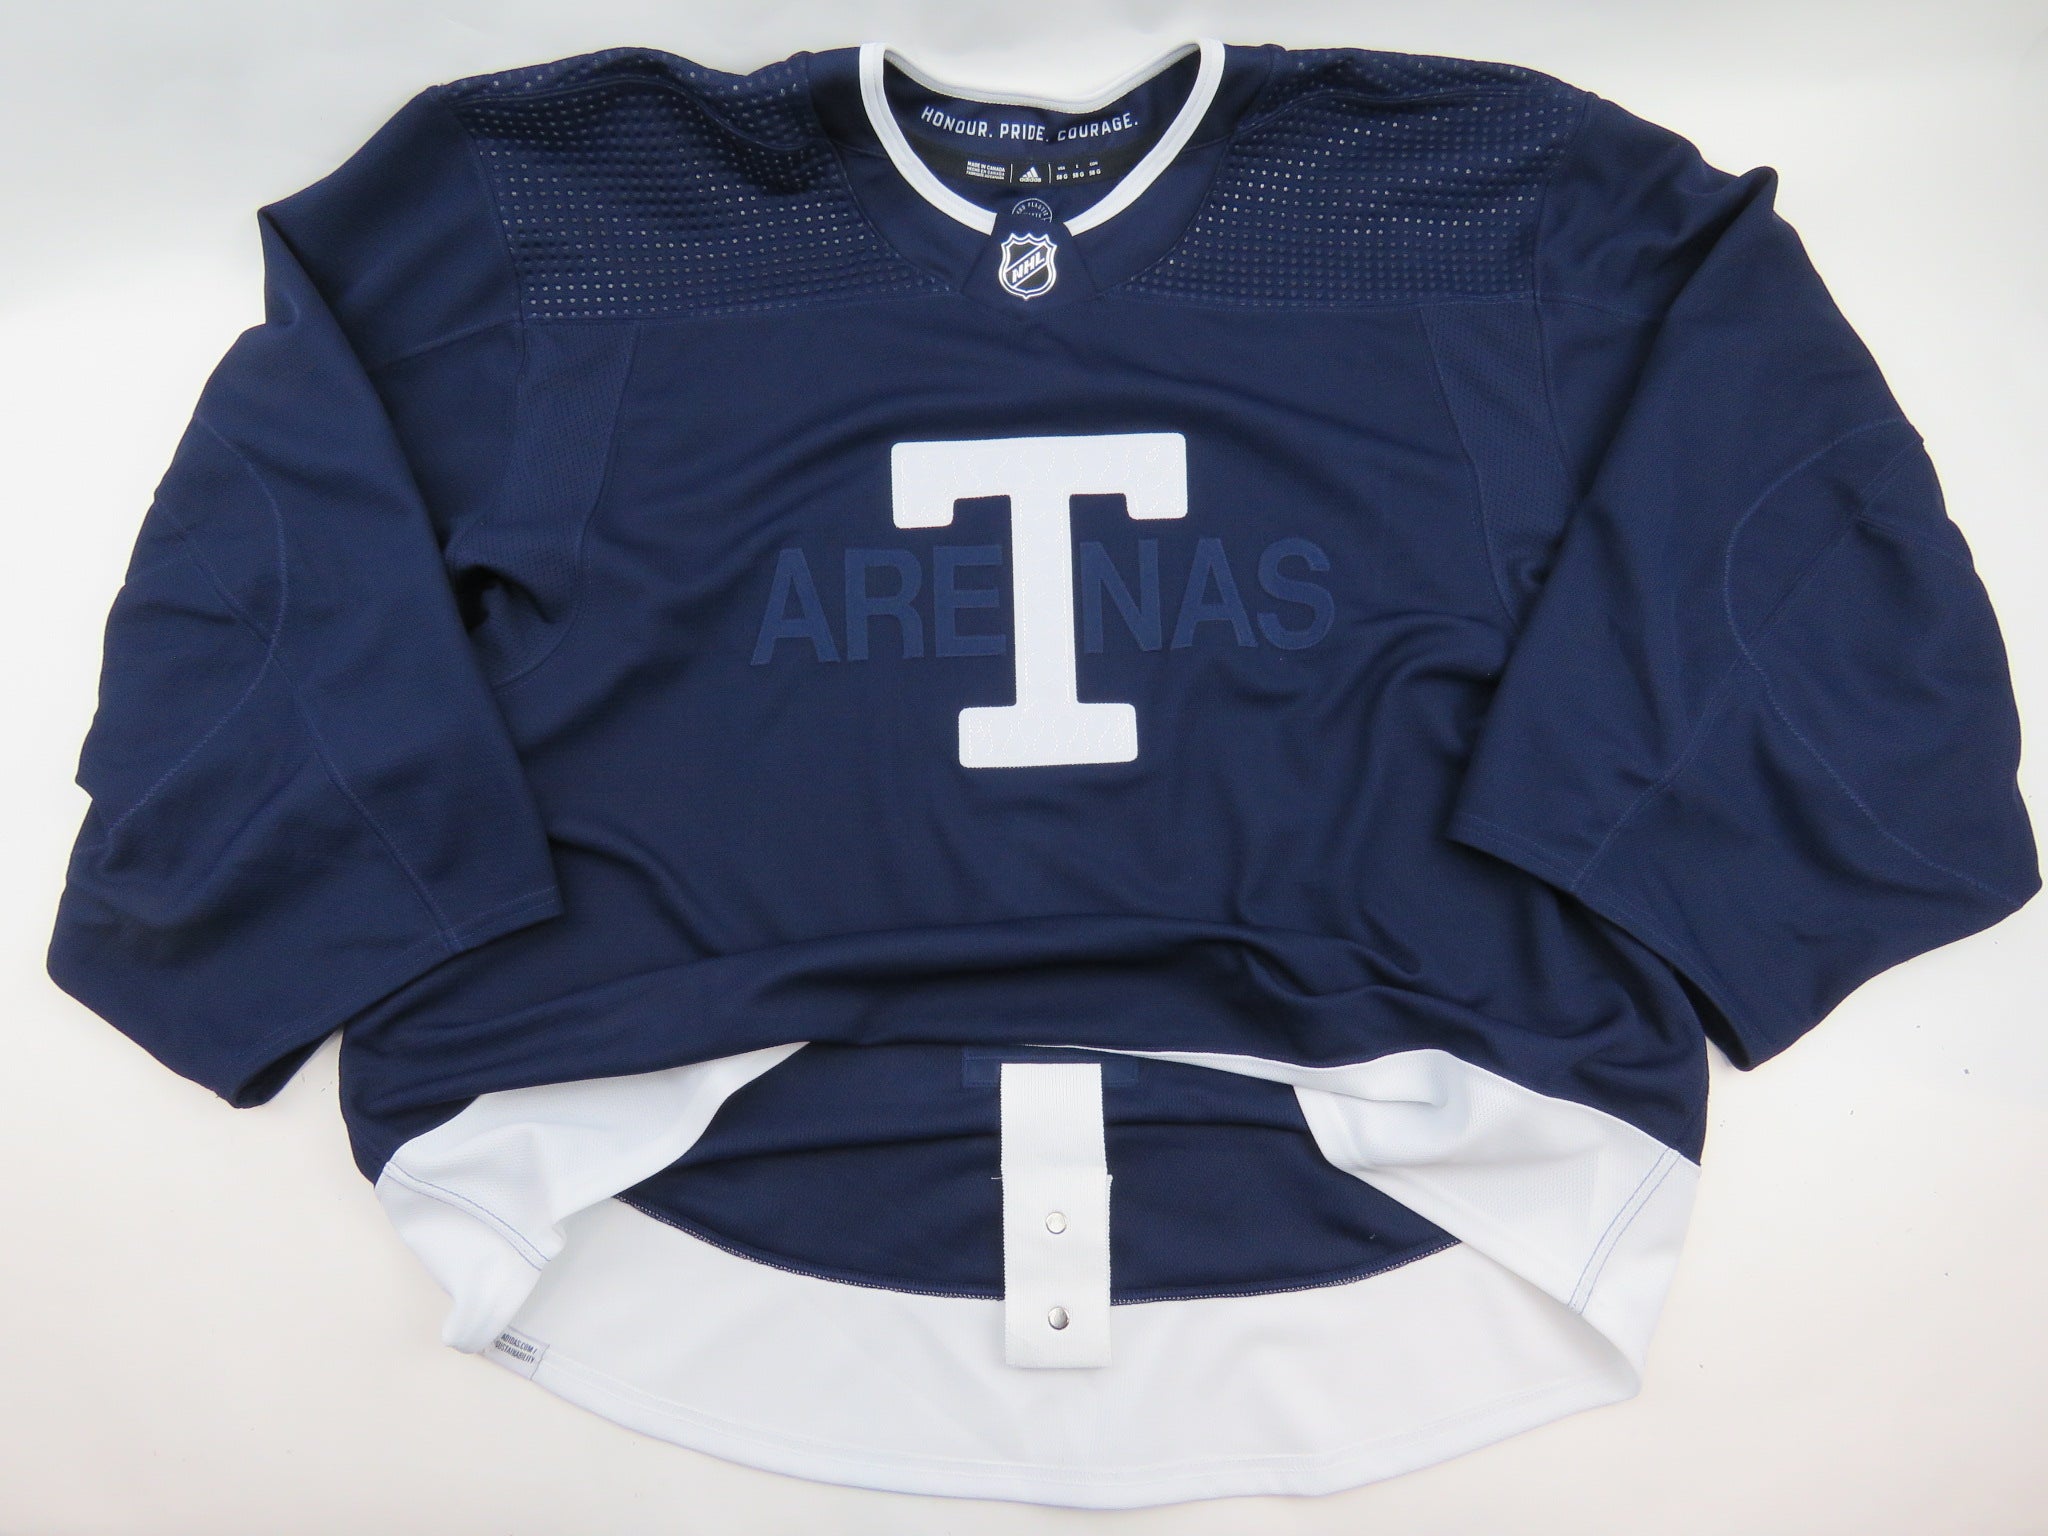 leafs arenas jersey